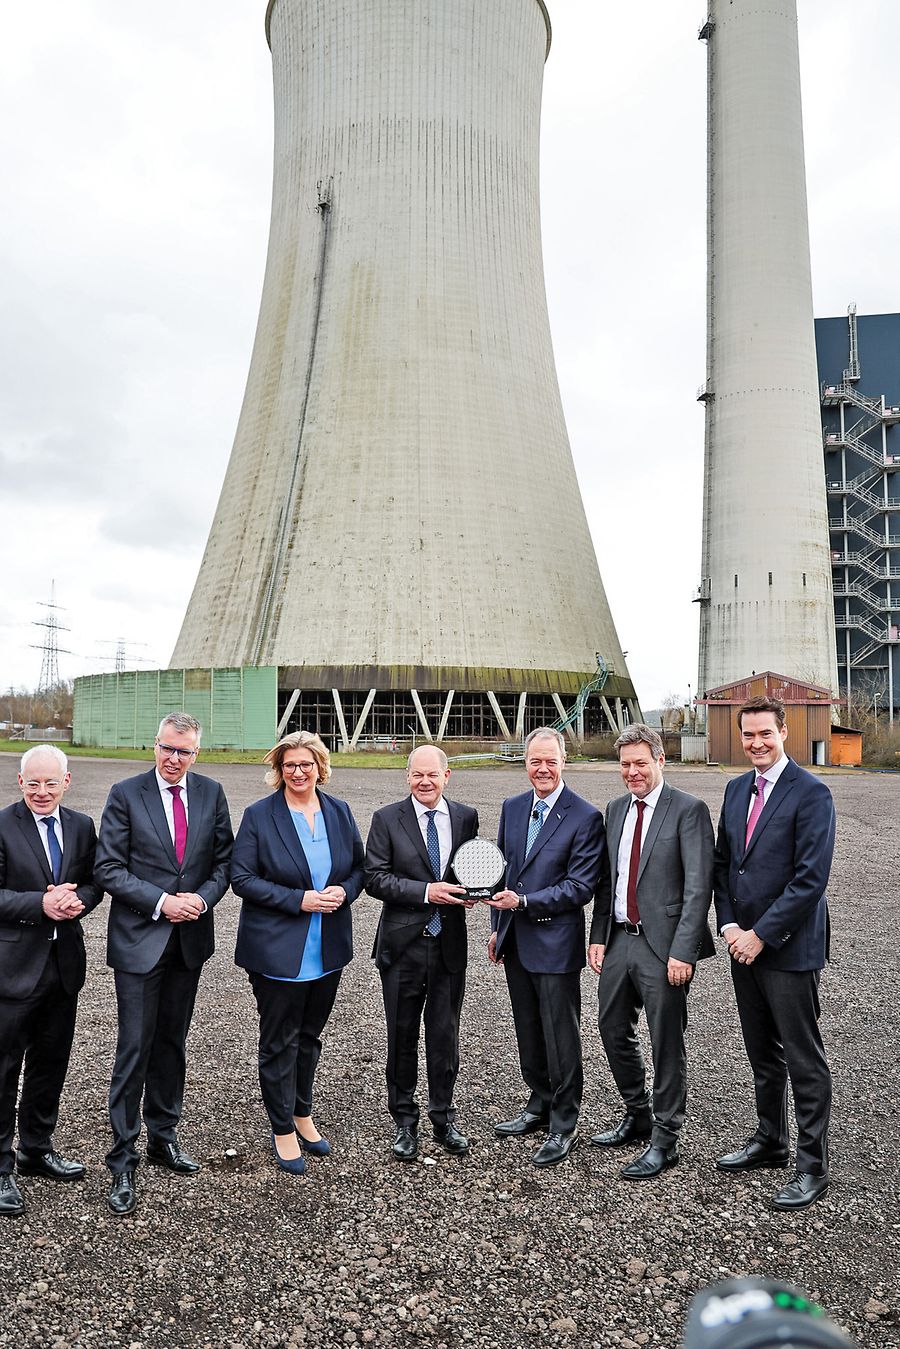 An optimistic atmosphere on the factory site: (left to right) Saarland’s Minister of Economic Affairs Jürgen Barke, ZF Chairman Holger Klein, Minister-President Anke Rehlinger, Federal Chancellor Olaf Scholz, Wolfspeed CEO Gregg Lowe, Federal Minister of Economic Affairs Robert Habeck and ZF Group board member Stefan von Schuckmann.